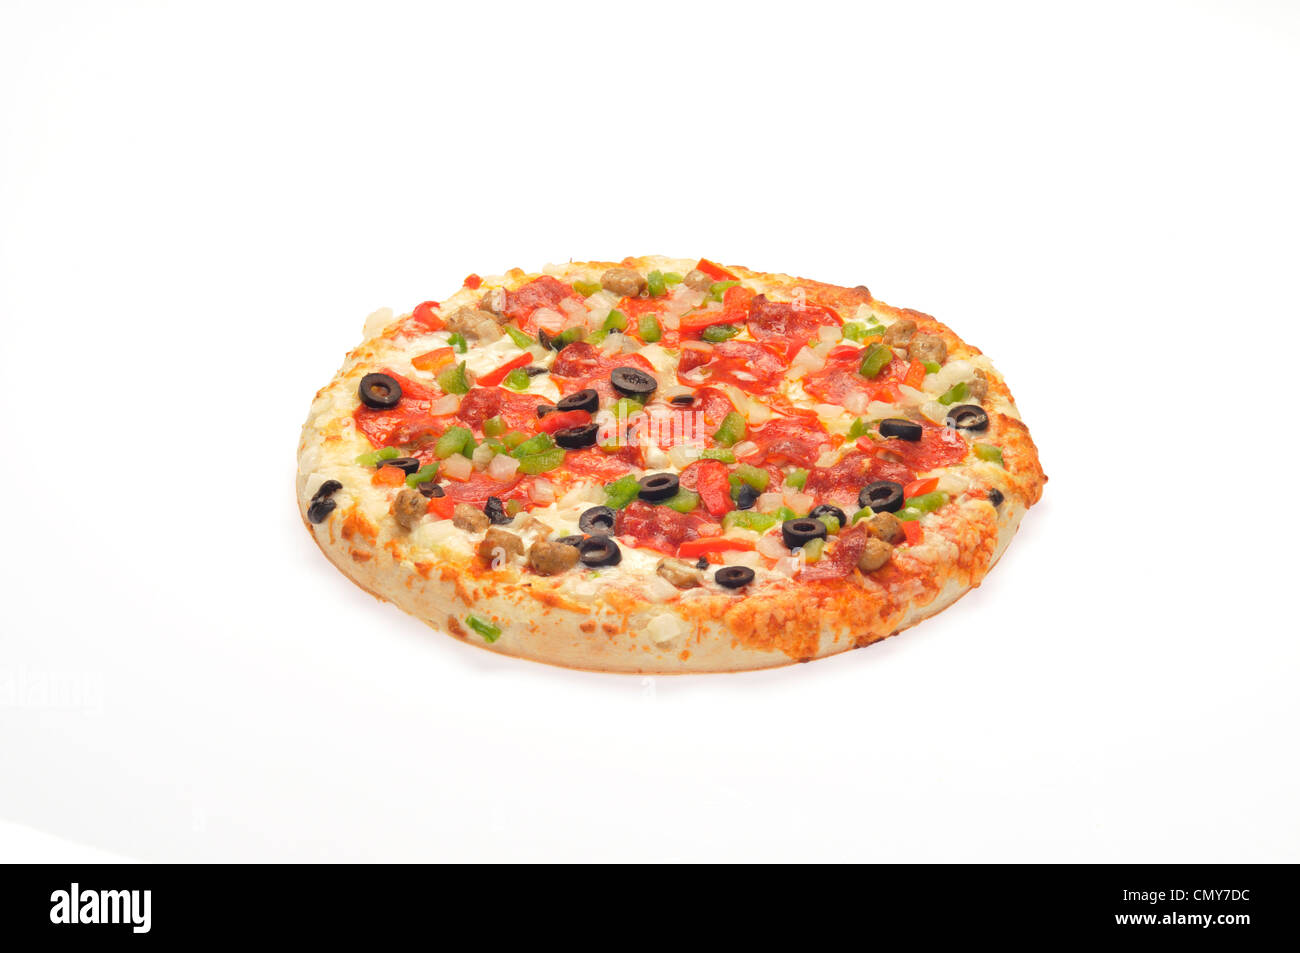 Hot pizza with cheese, pepperoni, sausage, red and green pepper, onion and black olives Stock Photo